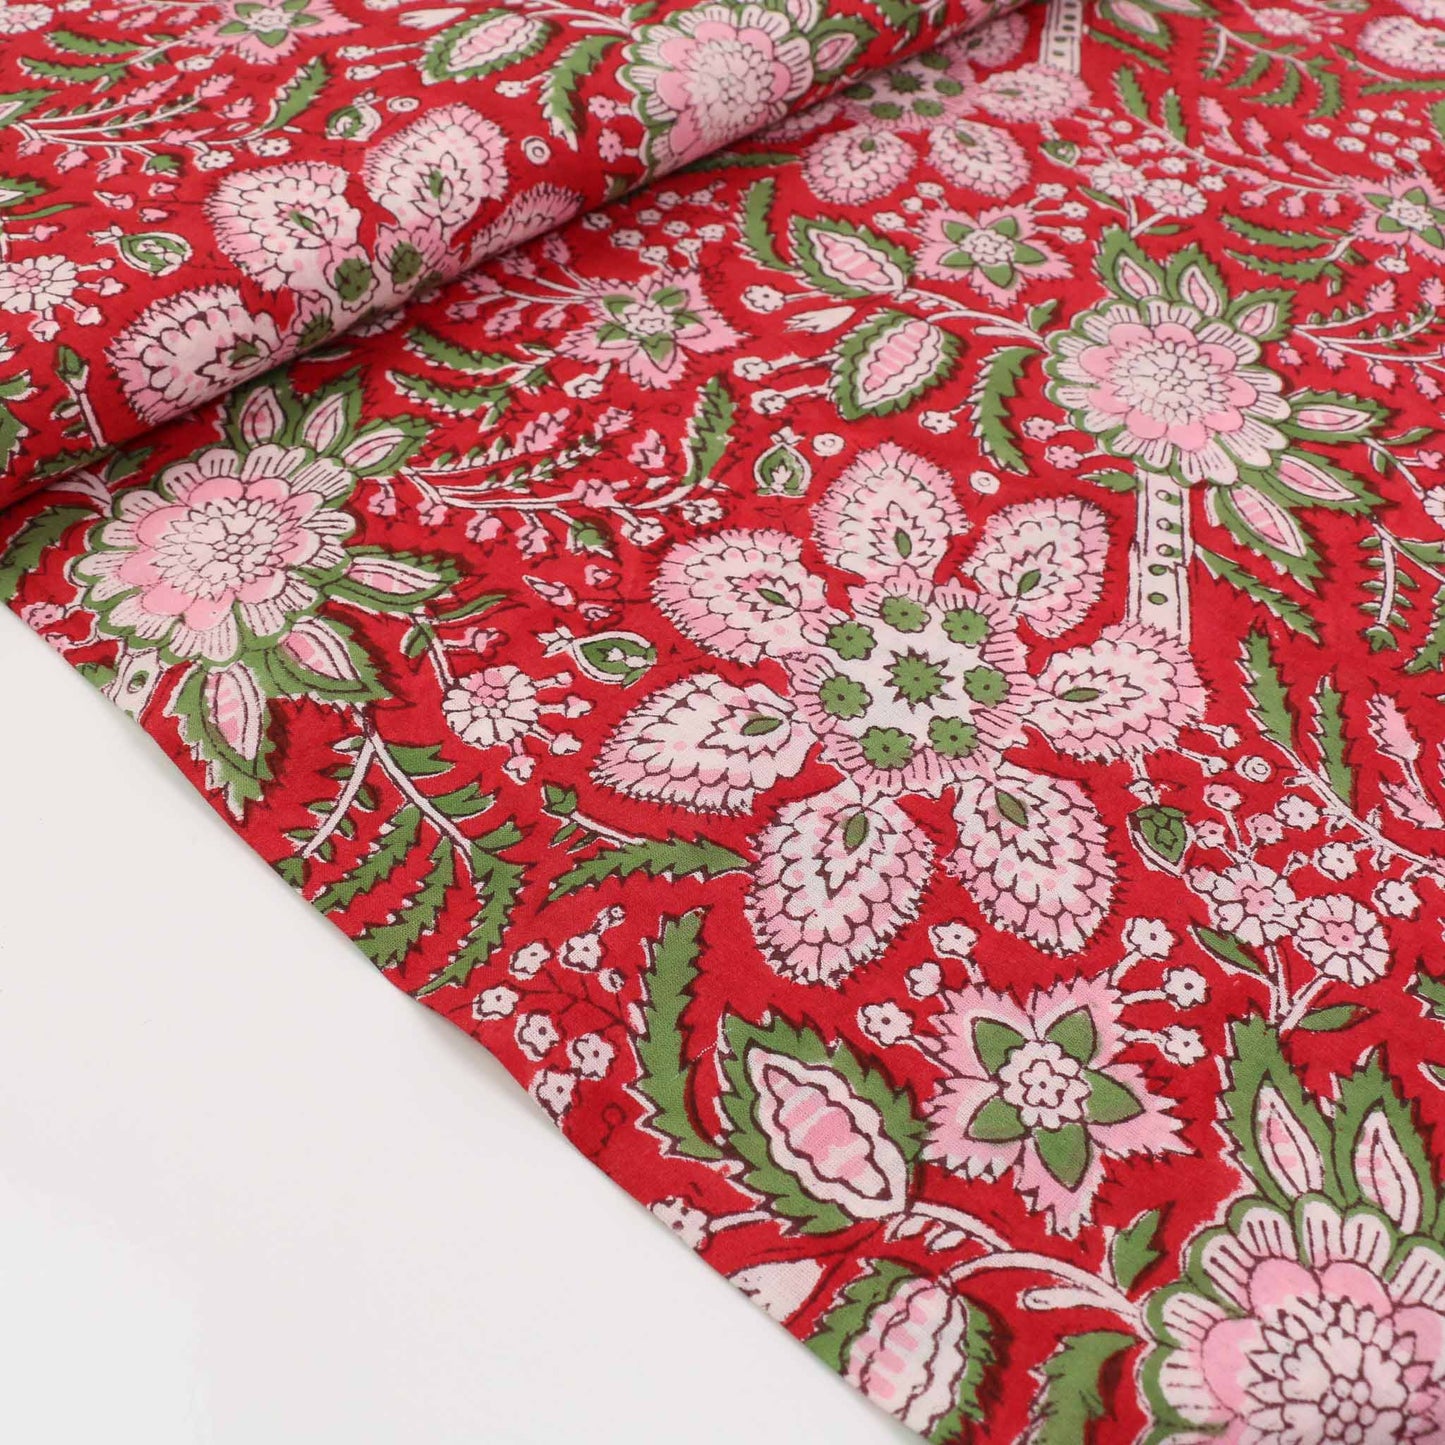 Cotton Voile - Hand block print - Red